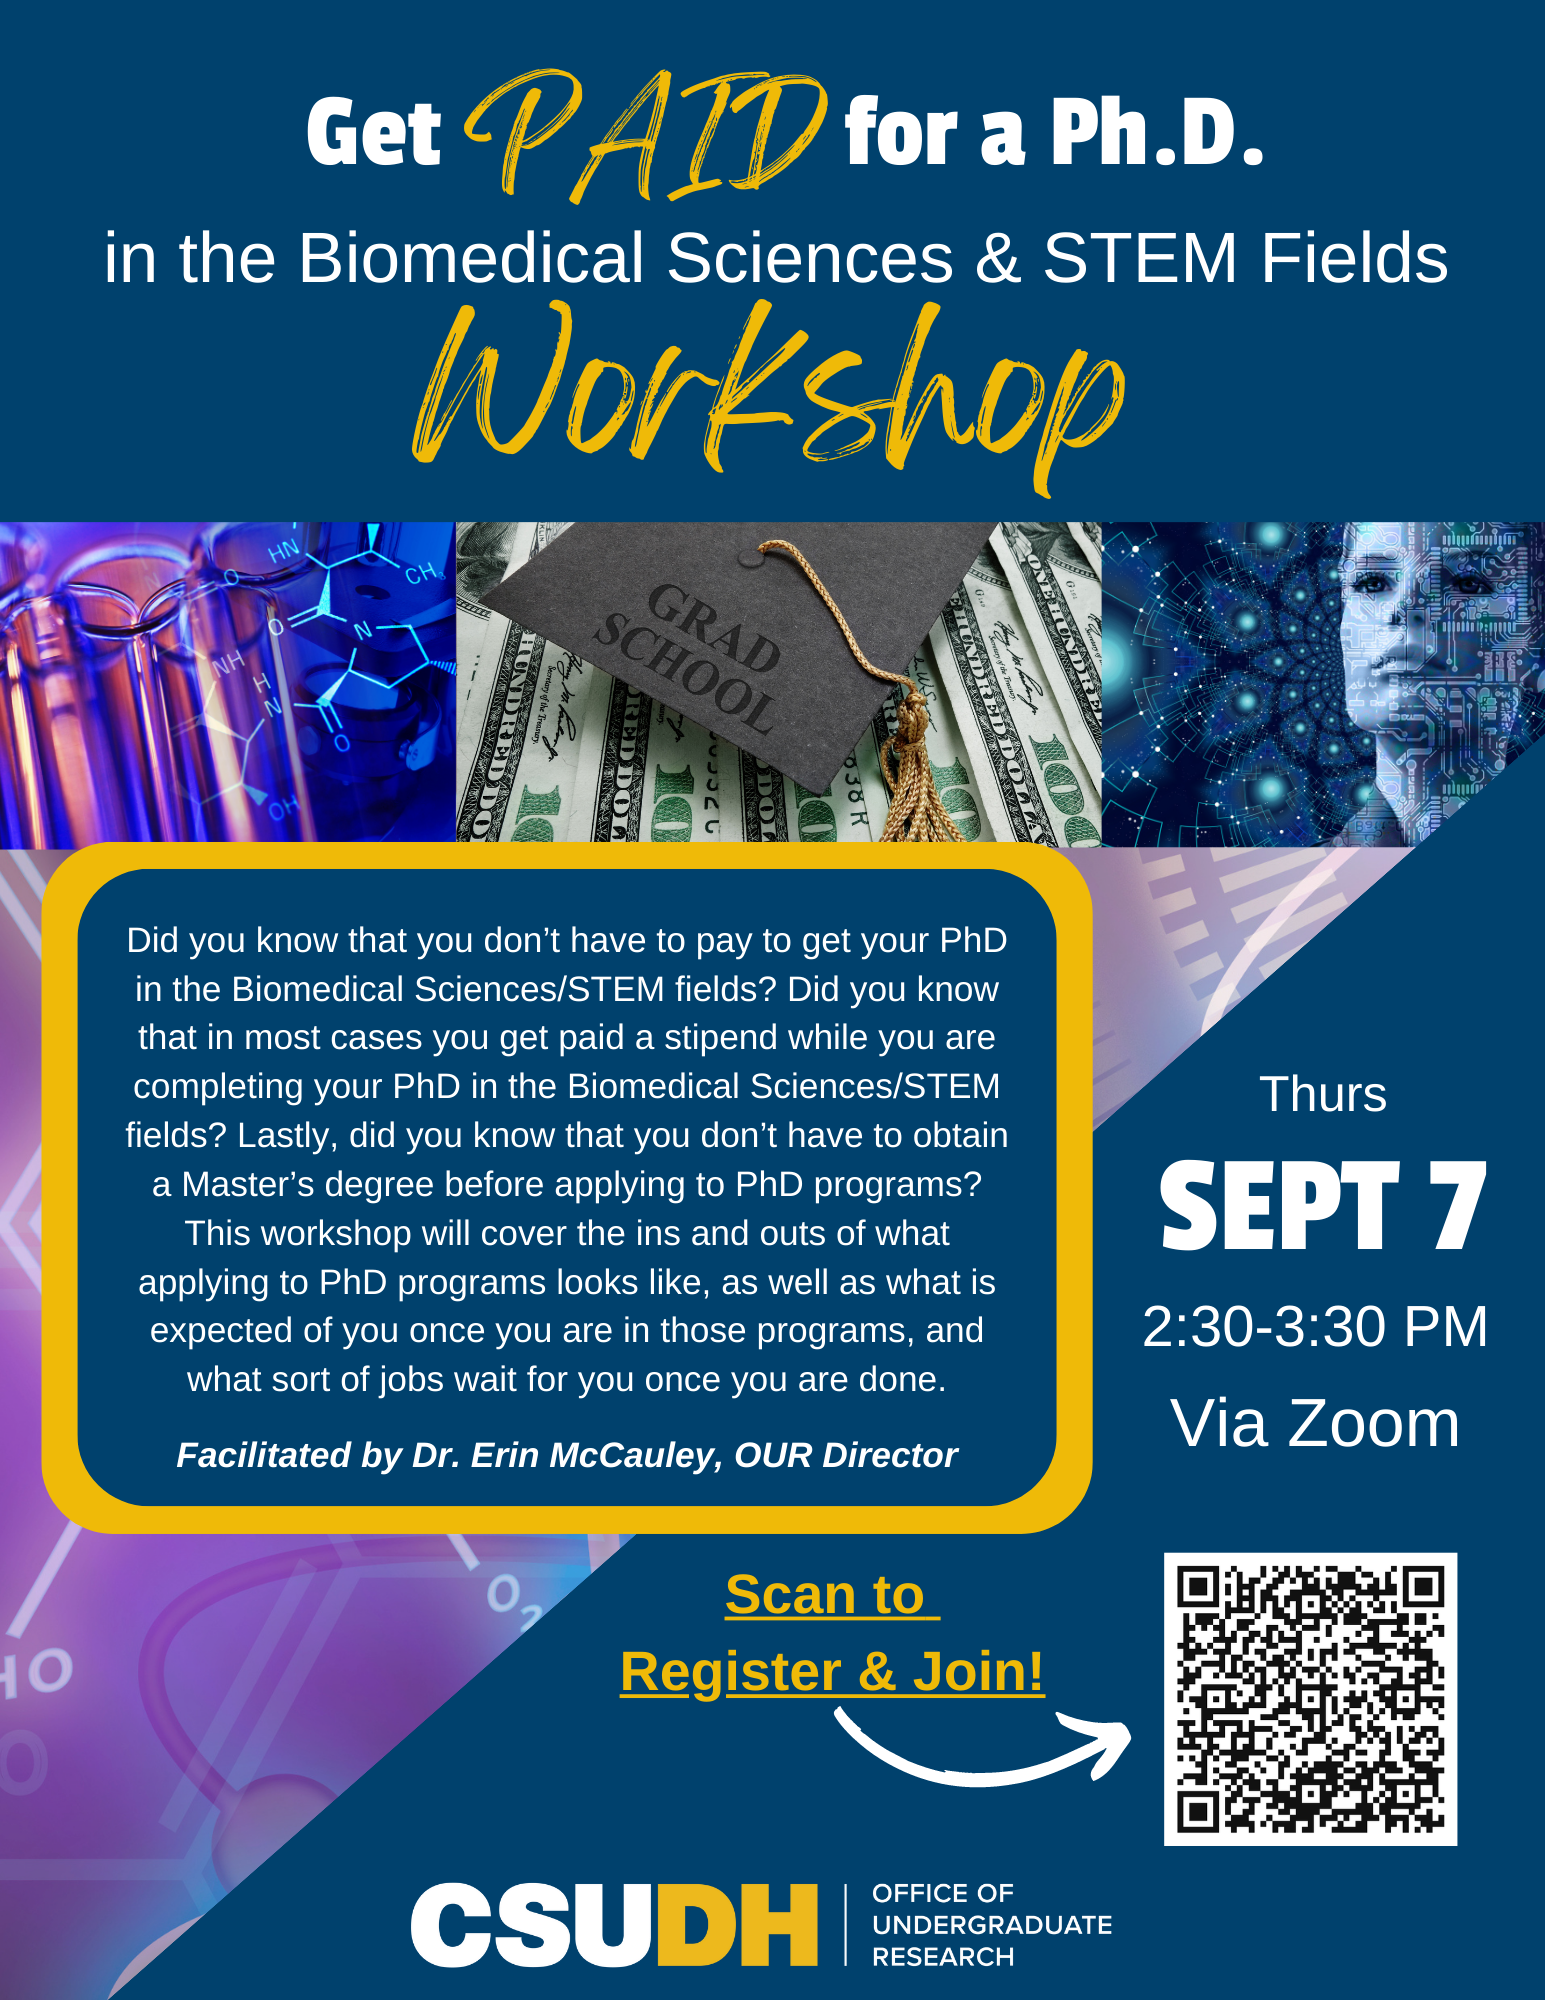 Get-PAID-for-a-PhD-in-the-Biomedcal-Sciences-STEM-Fields-9-7-23